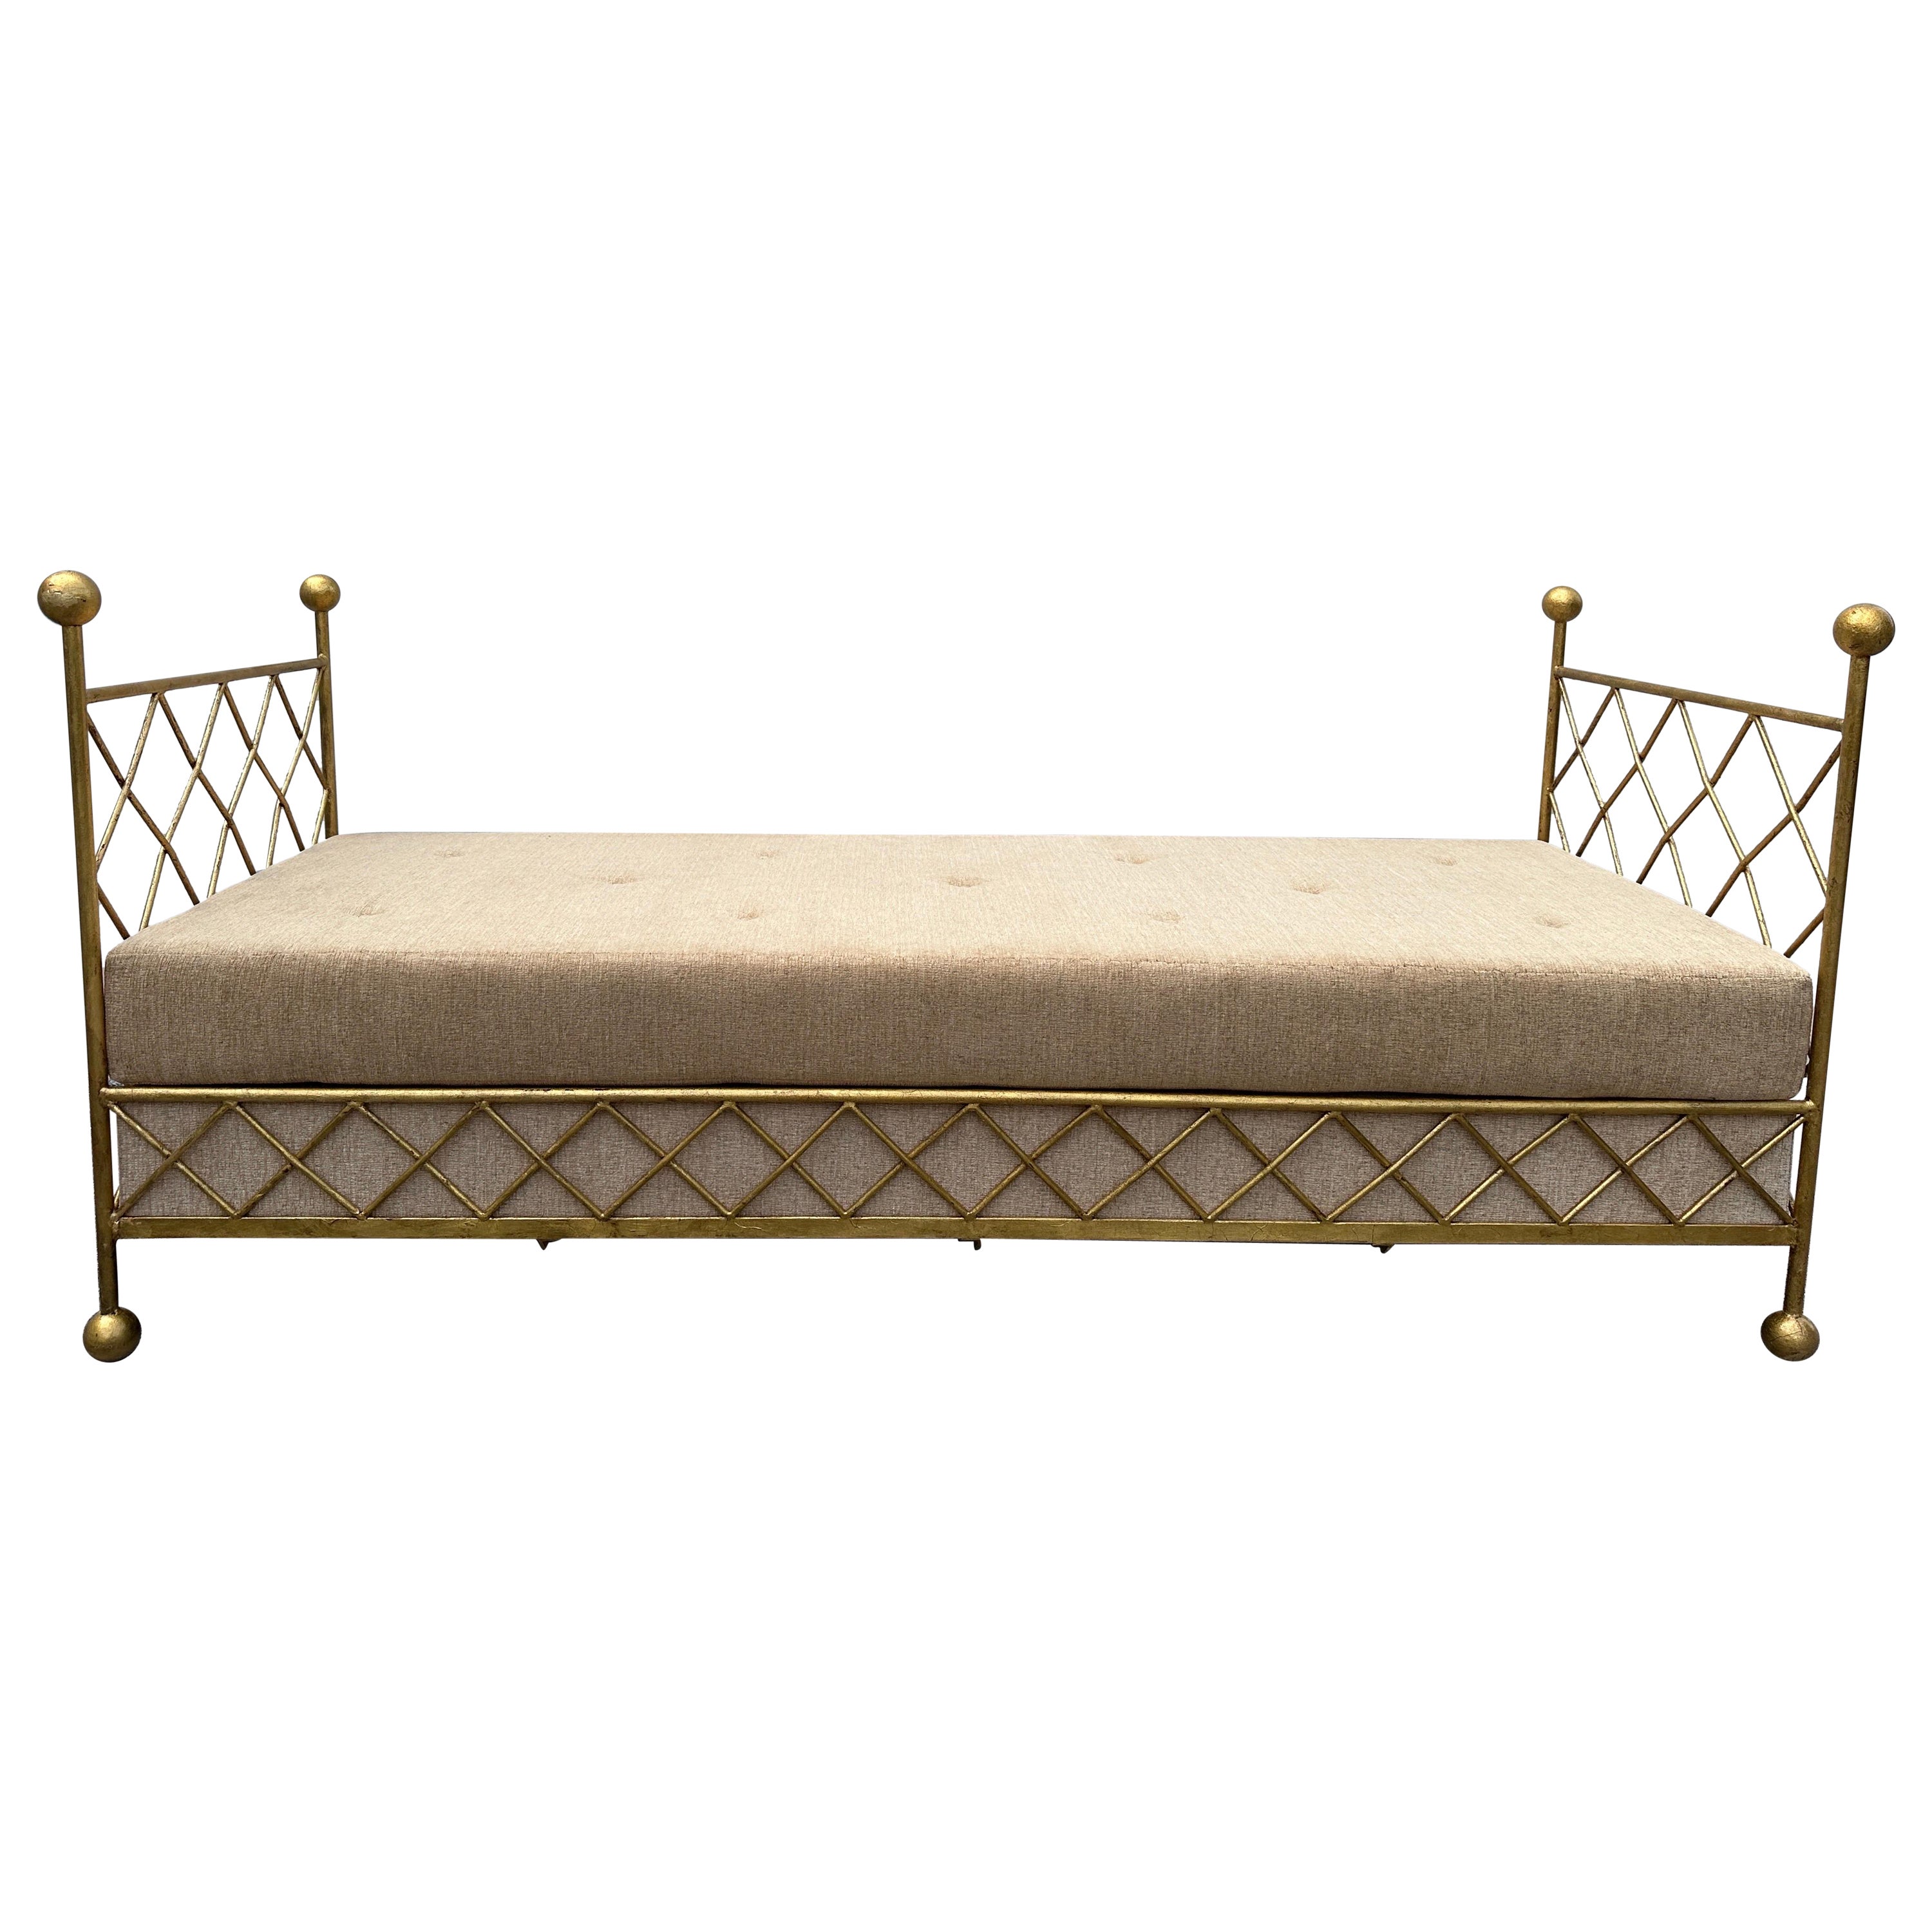 1980's French Gilt Iron Daybed - Newly Upholstered